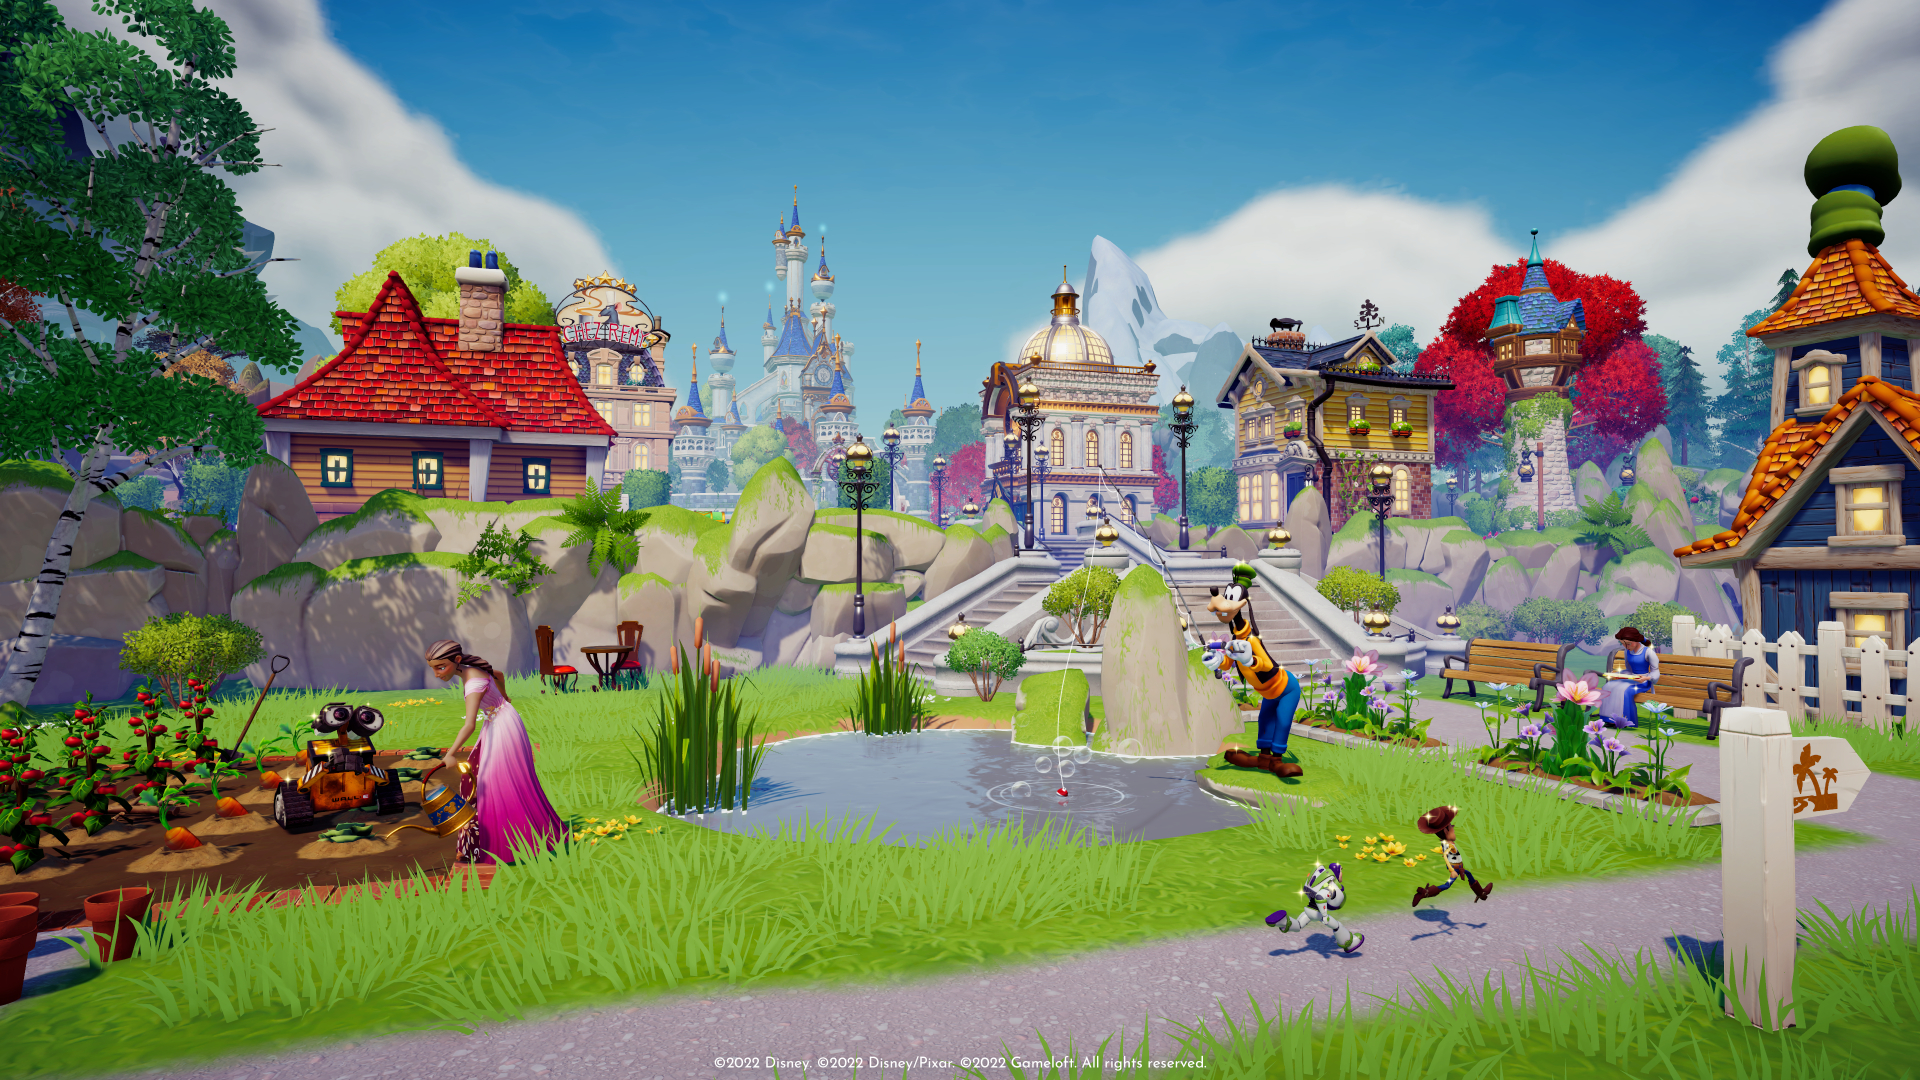 Disney Dreamlight Valley: Everything you need to know about the free adventure sim